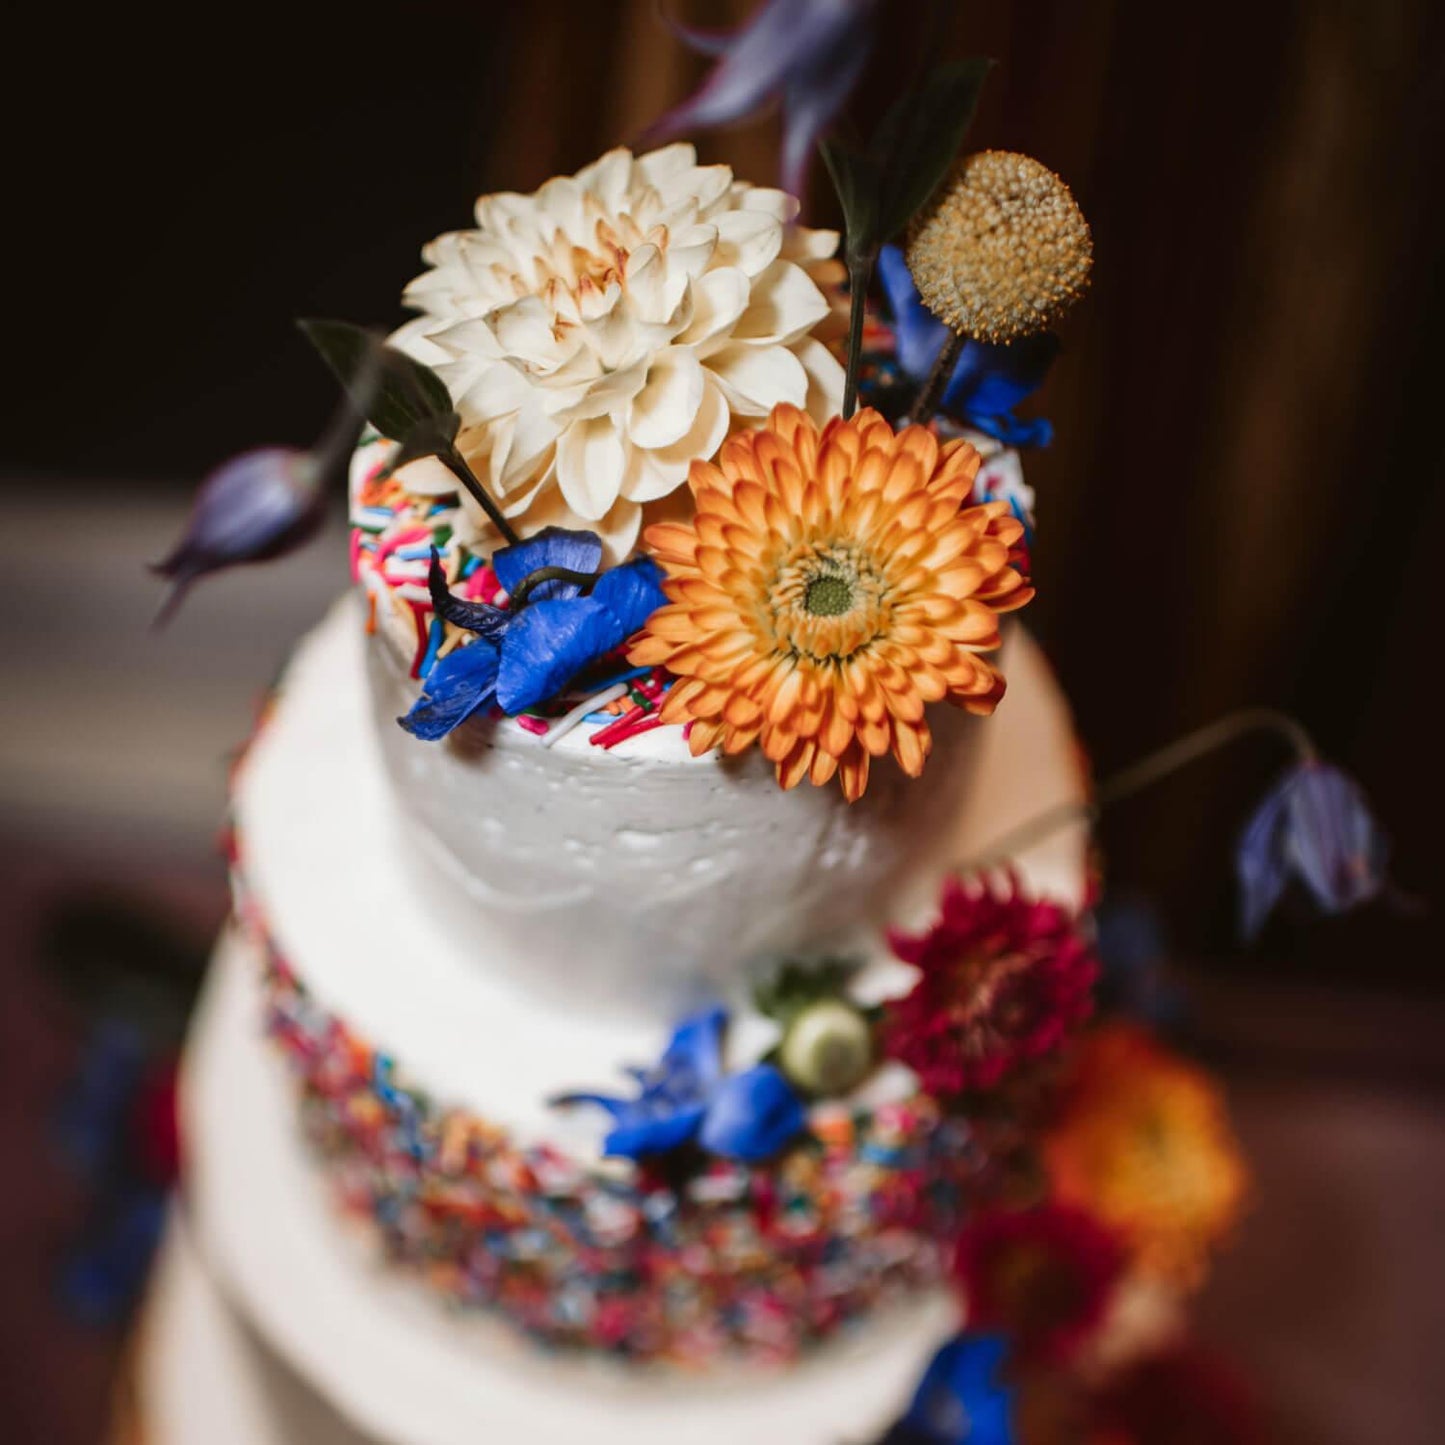 Load image into Gallery viewer, Top tier of a white cake beautifully adorned with a vibrant assortment of flowers including a large cream-colored flower, an orange gerbera, and blue petals, surrounded by other colorful floral decorations. Order online for same-day flower delivery from the best florist in Toronto near you.
